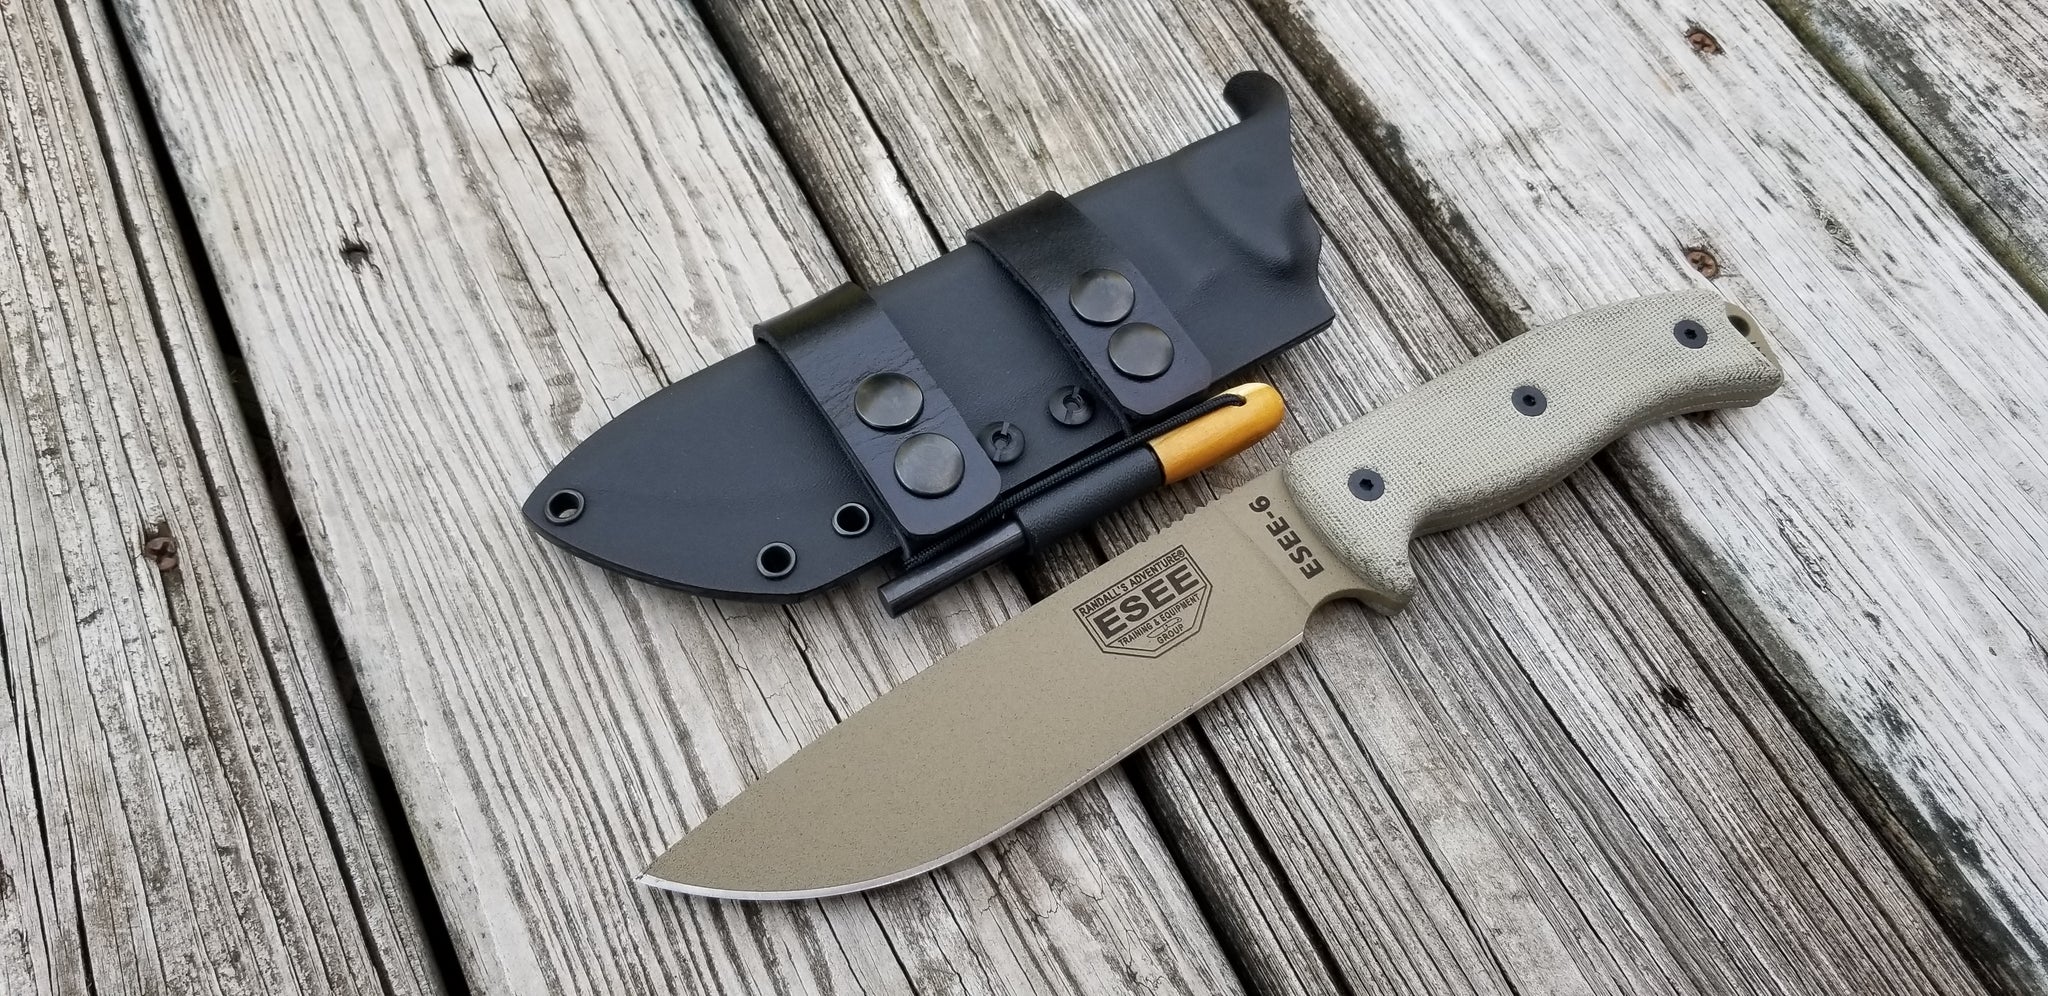 ESEE-6 Custom Taco style Kydex Sheath in Scout carry w/ double snap leather belt attach and fire steel holder